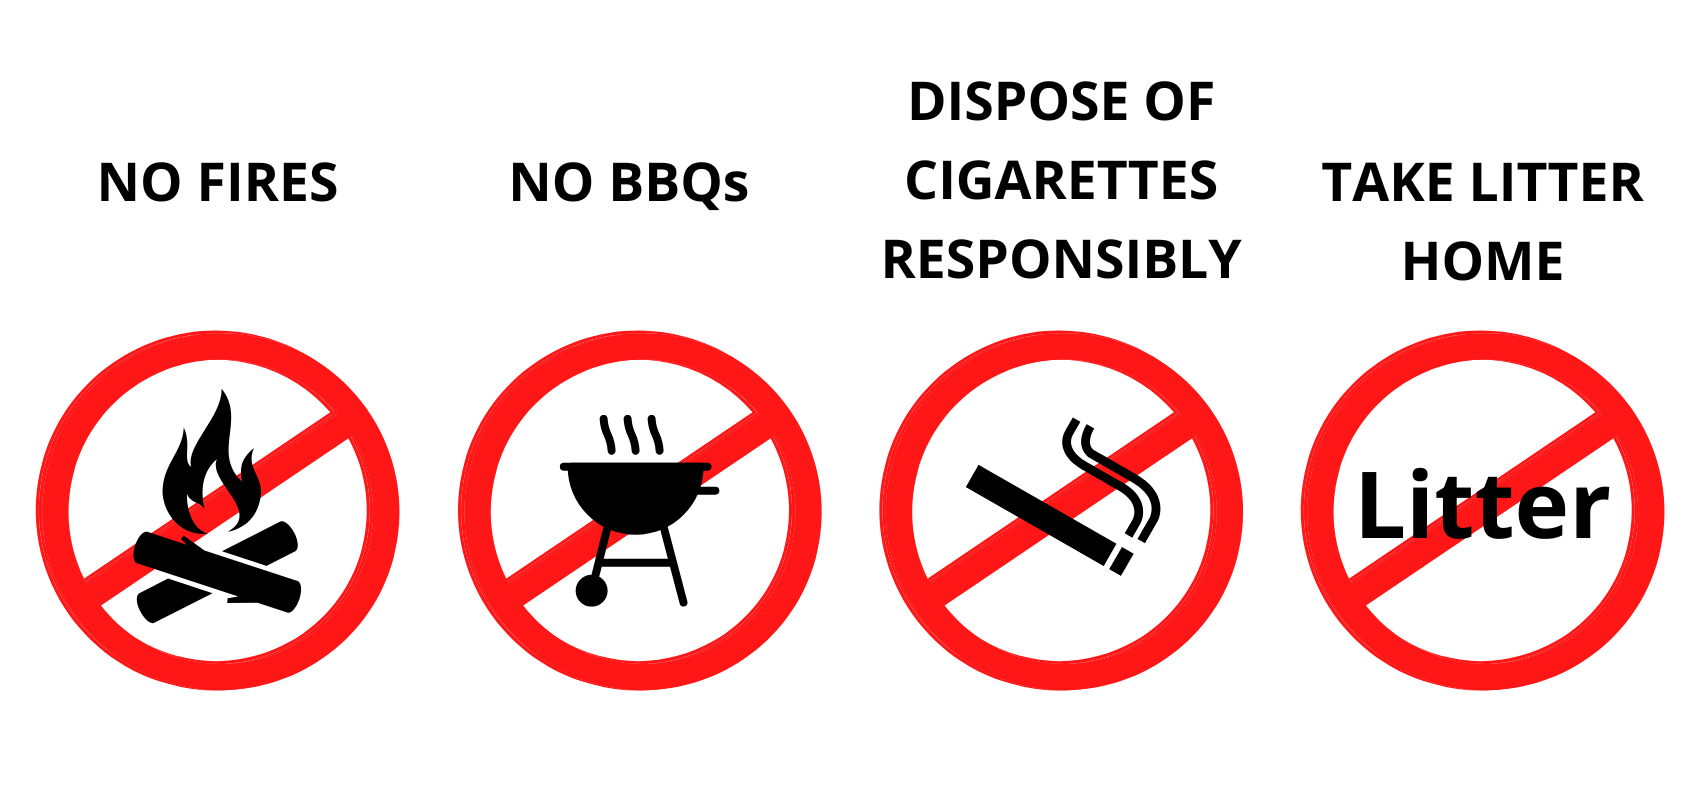 NO FIRES, NO BBQs, DISPOSE OF CIGARETTES RESPONSIBLY and TAKE LITTER HOME